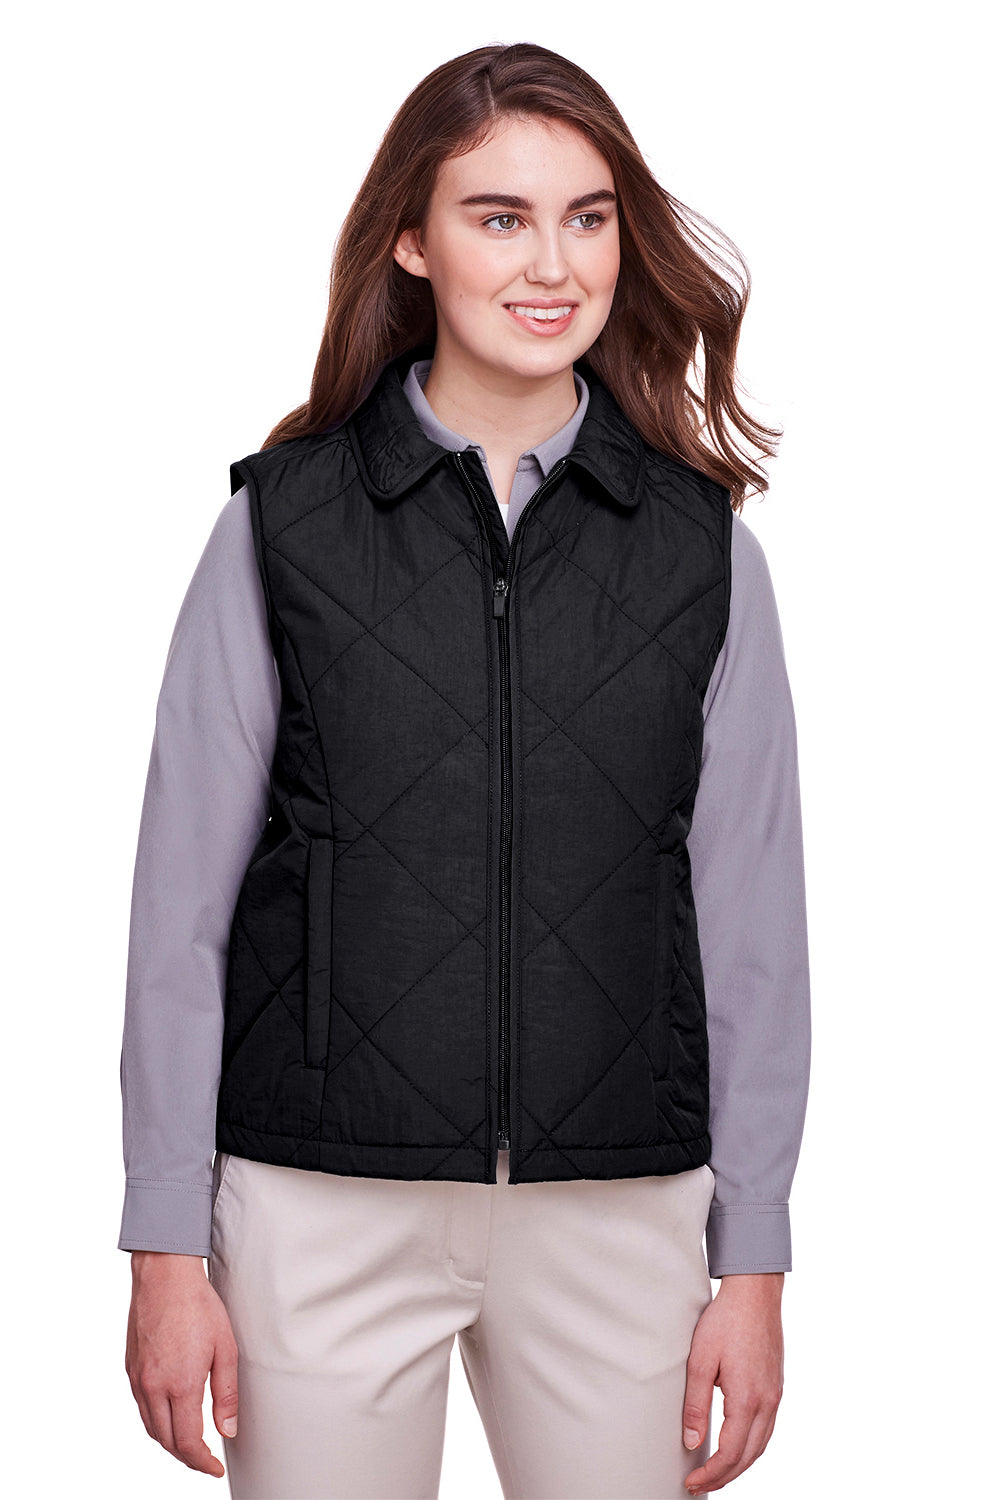 UltraClub UC709W Womens Dawson Quilted Full Zip Vest Black Front